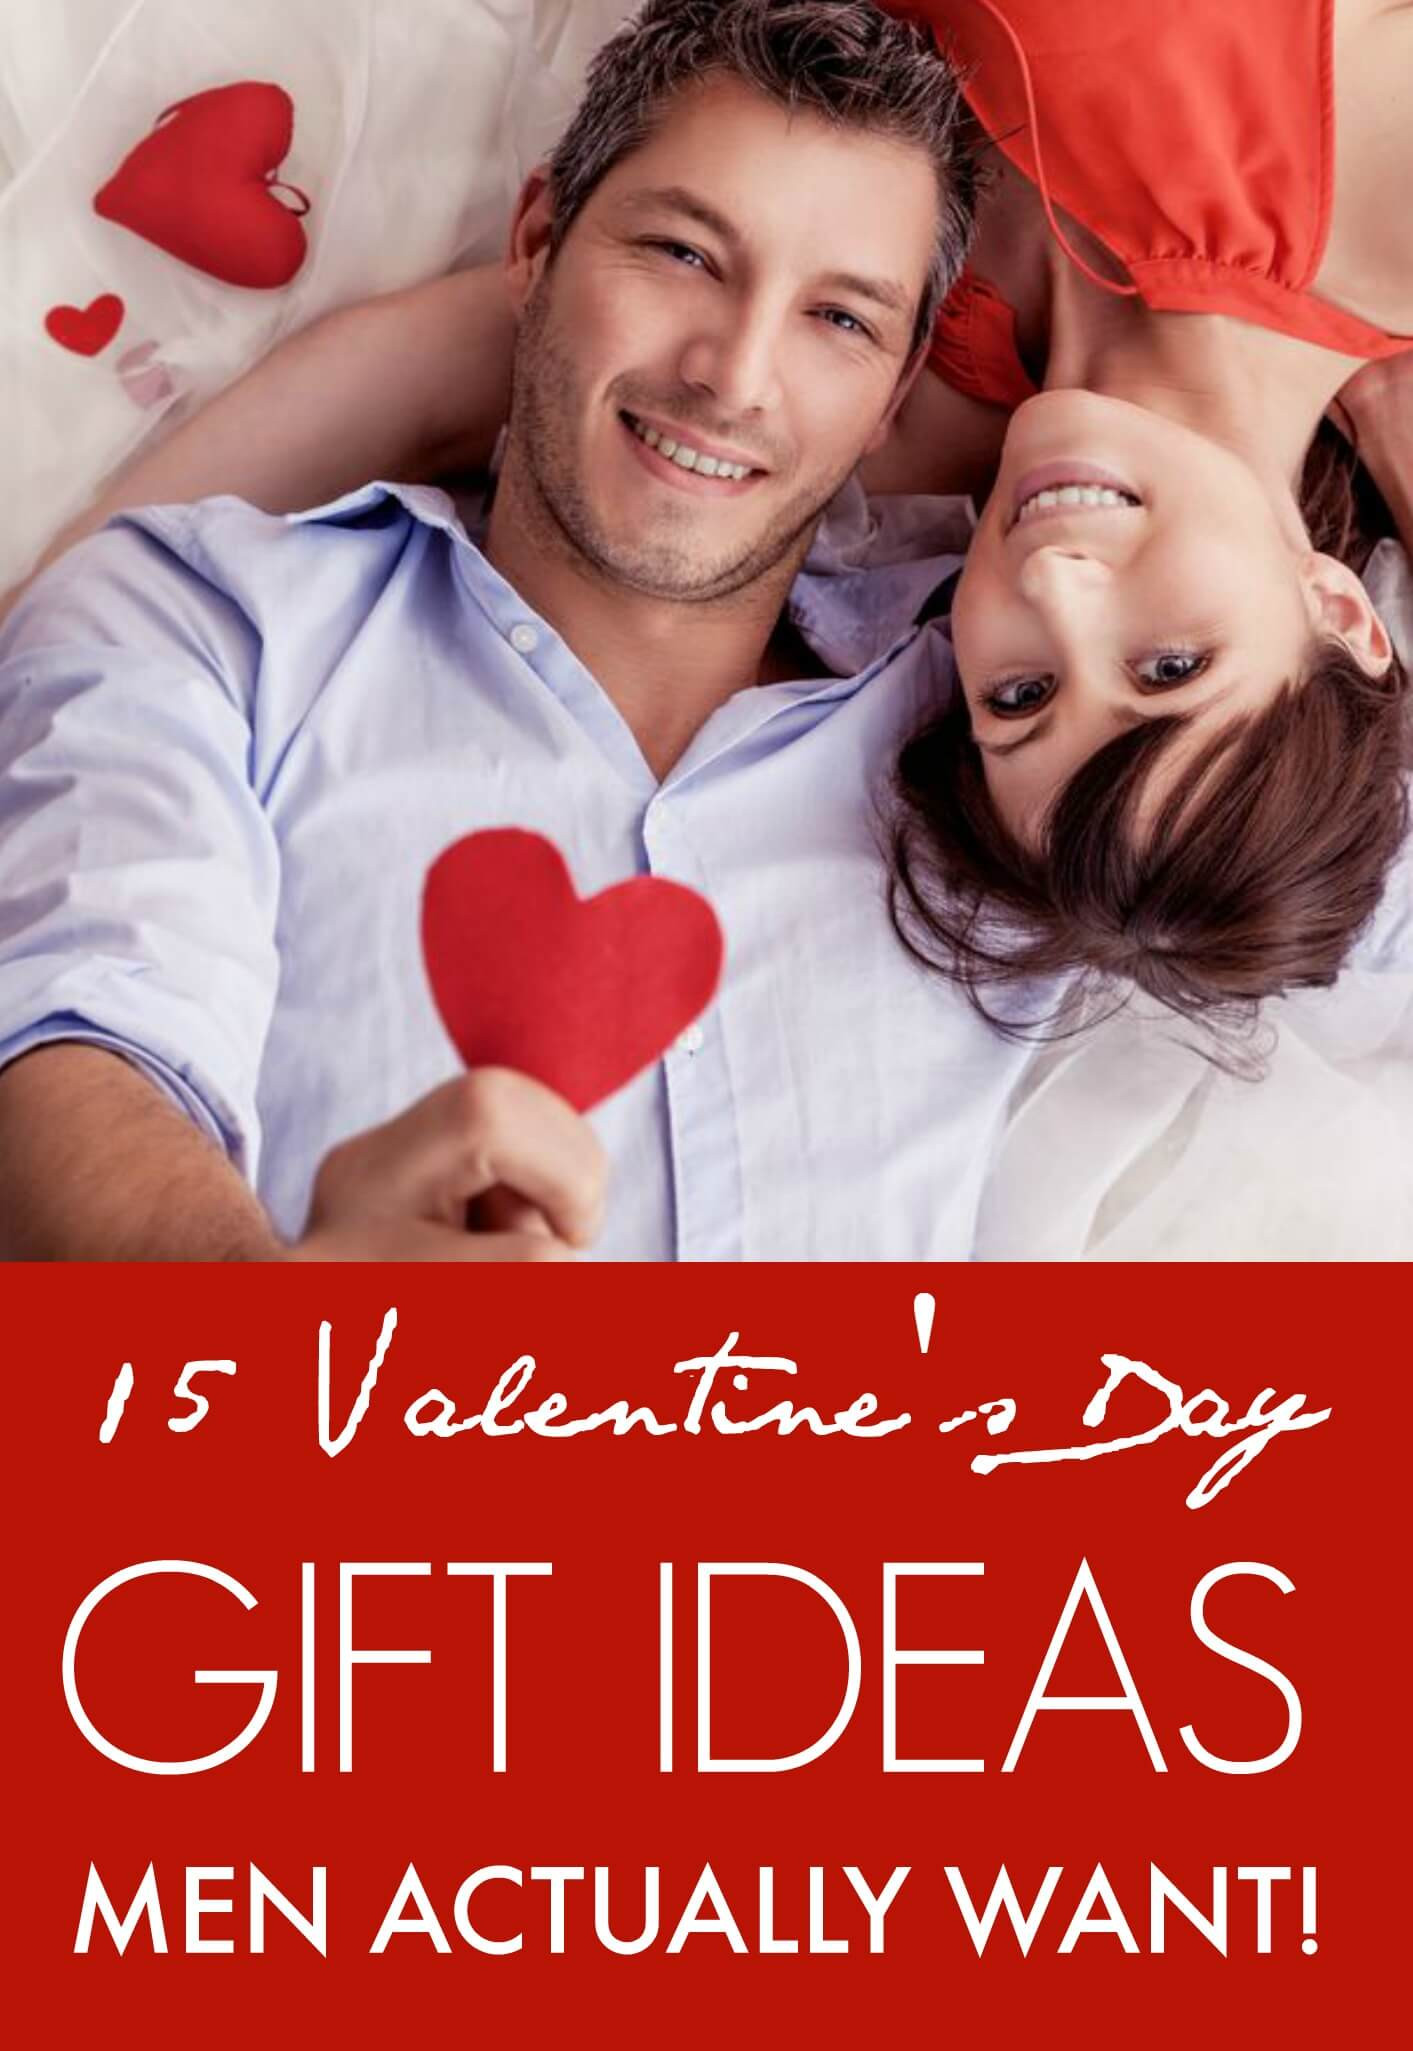 Valentines Gift For Guys Ideas
 15 Valentine’s Day Gift ideas Men Actually Want